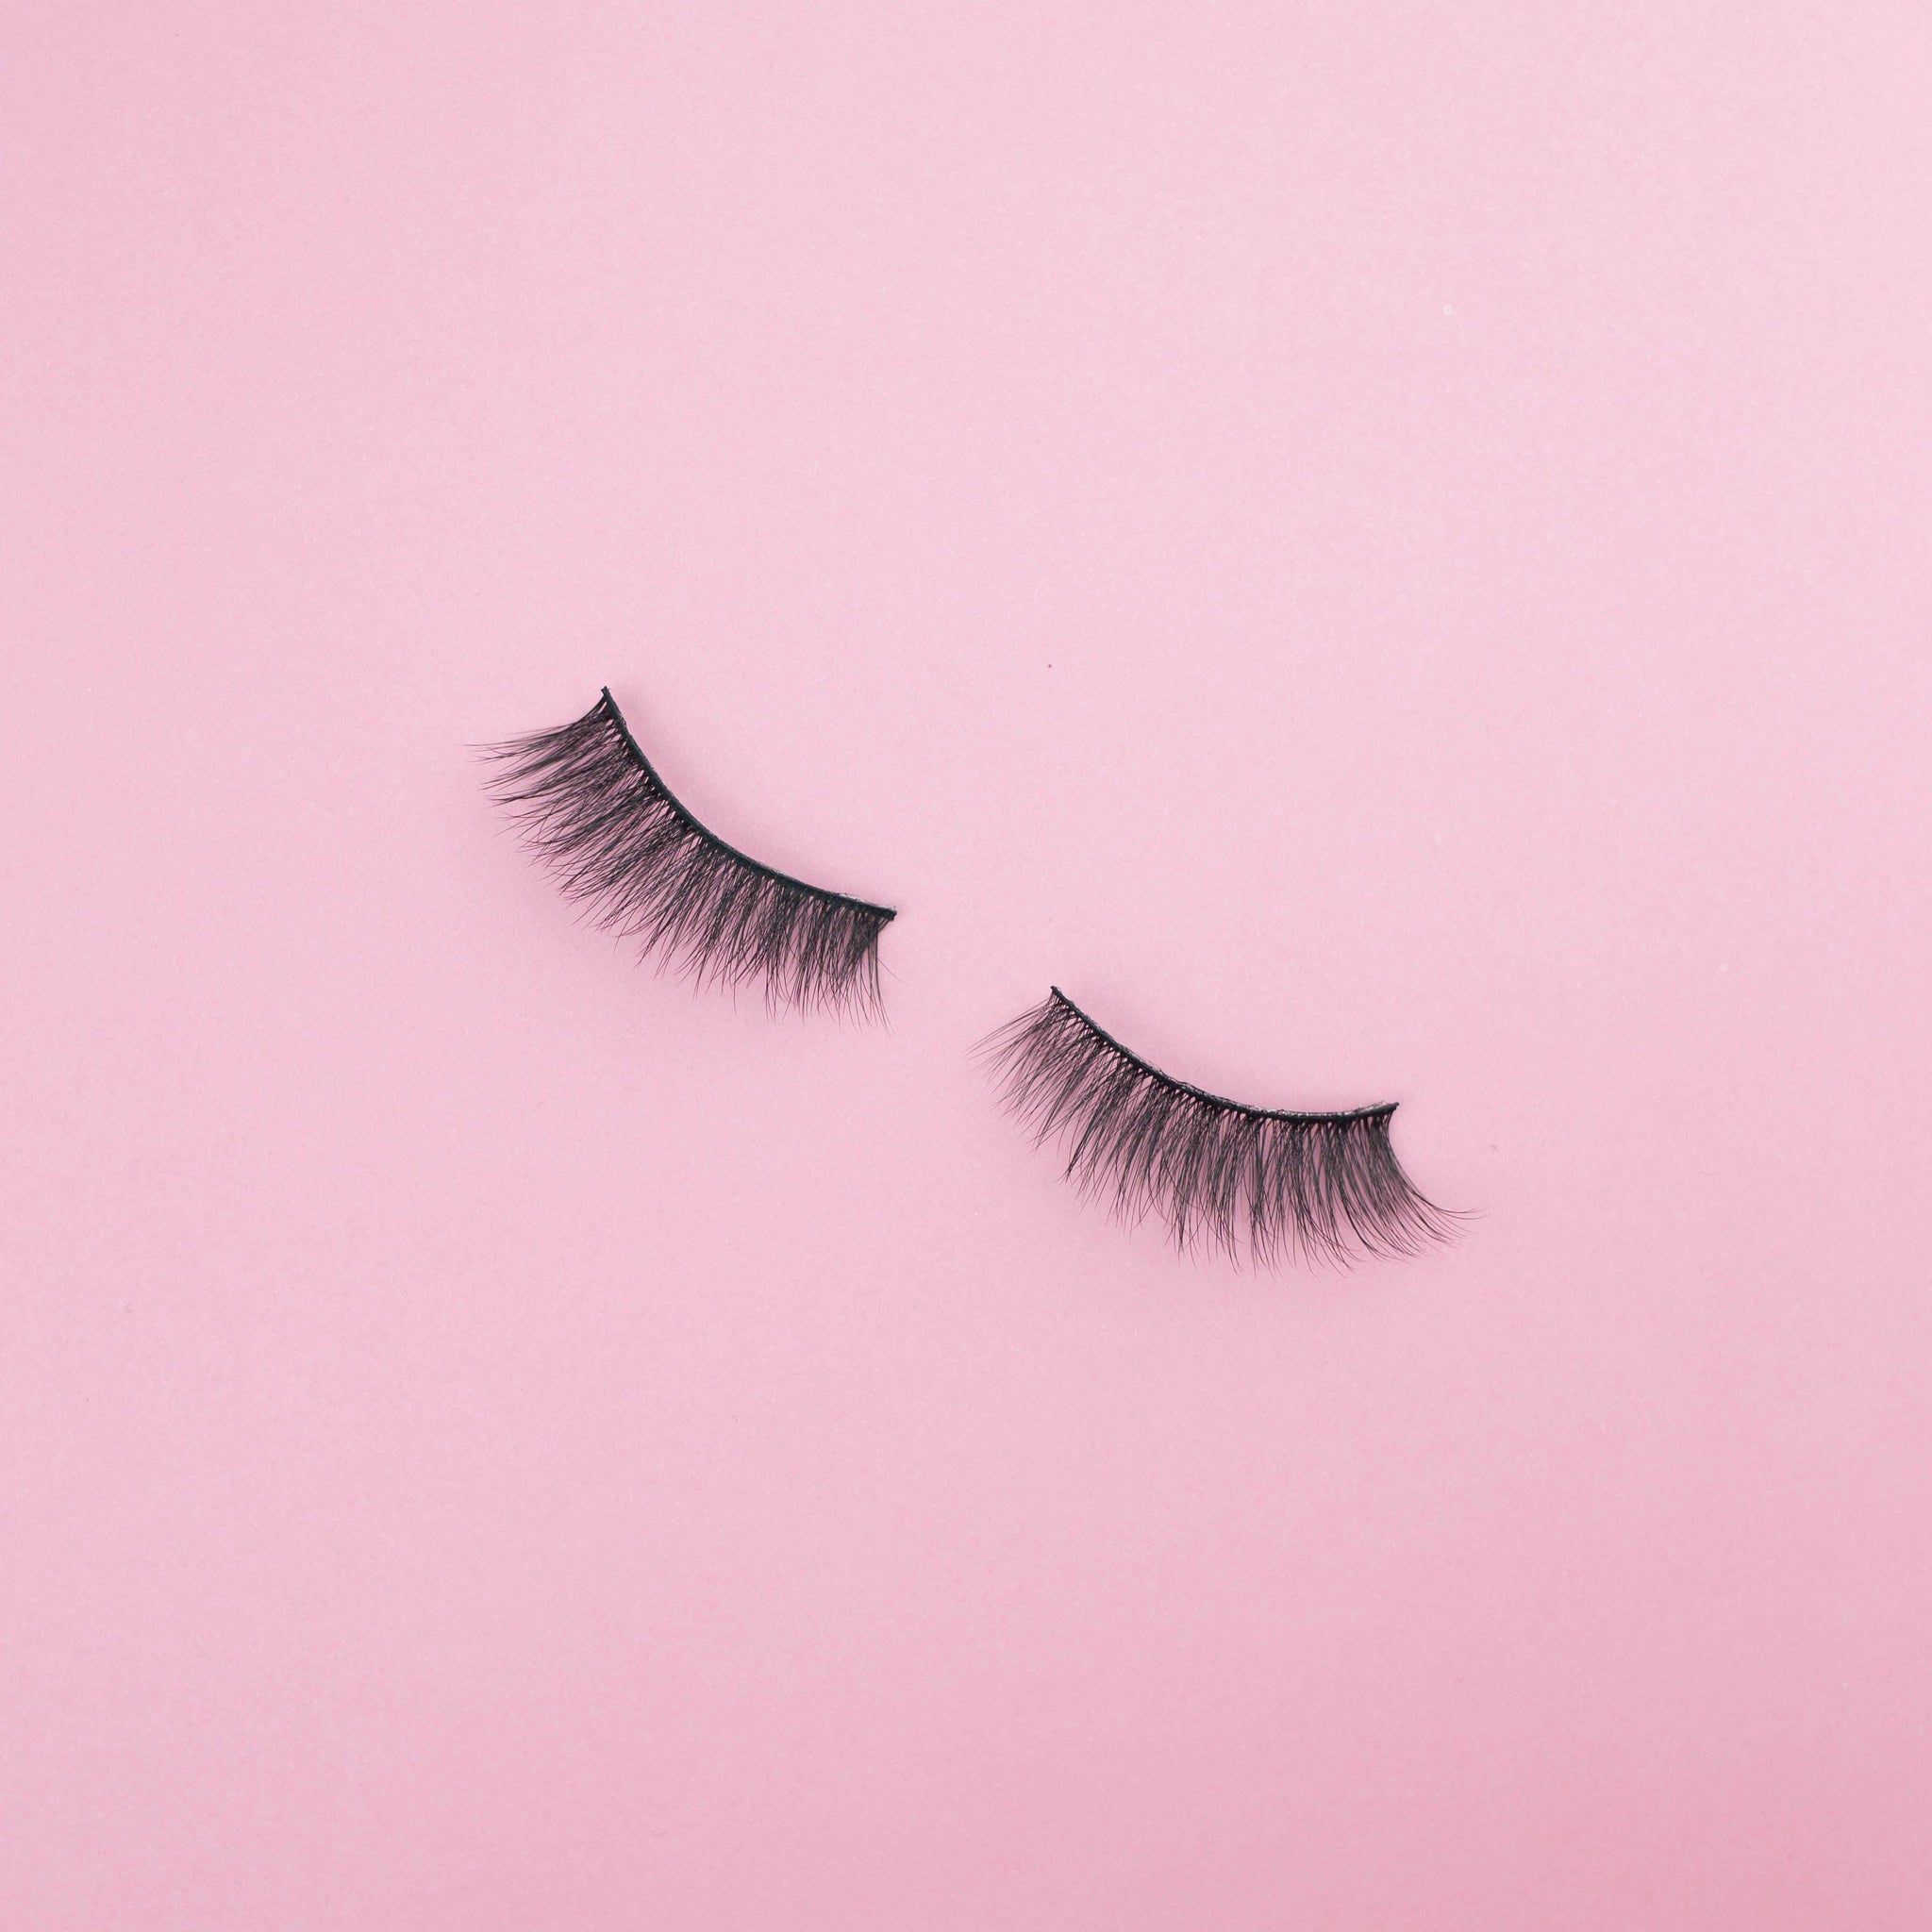 A pair of false eyelashes on a pink background. - 90s anime